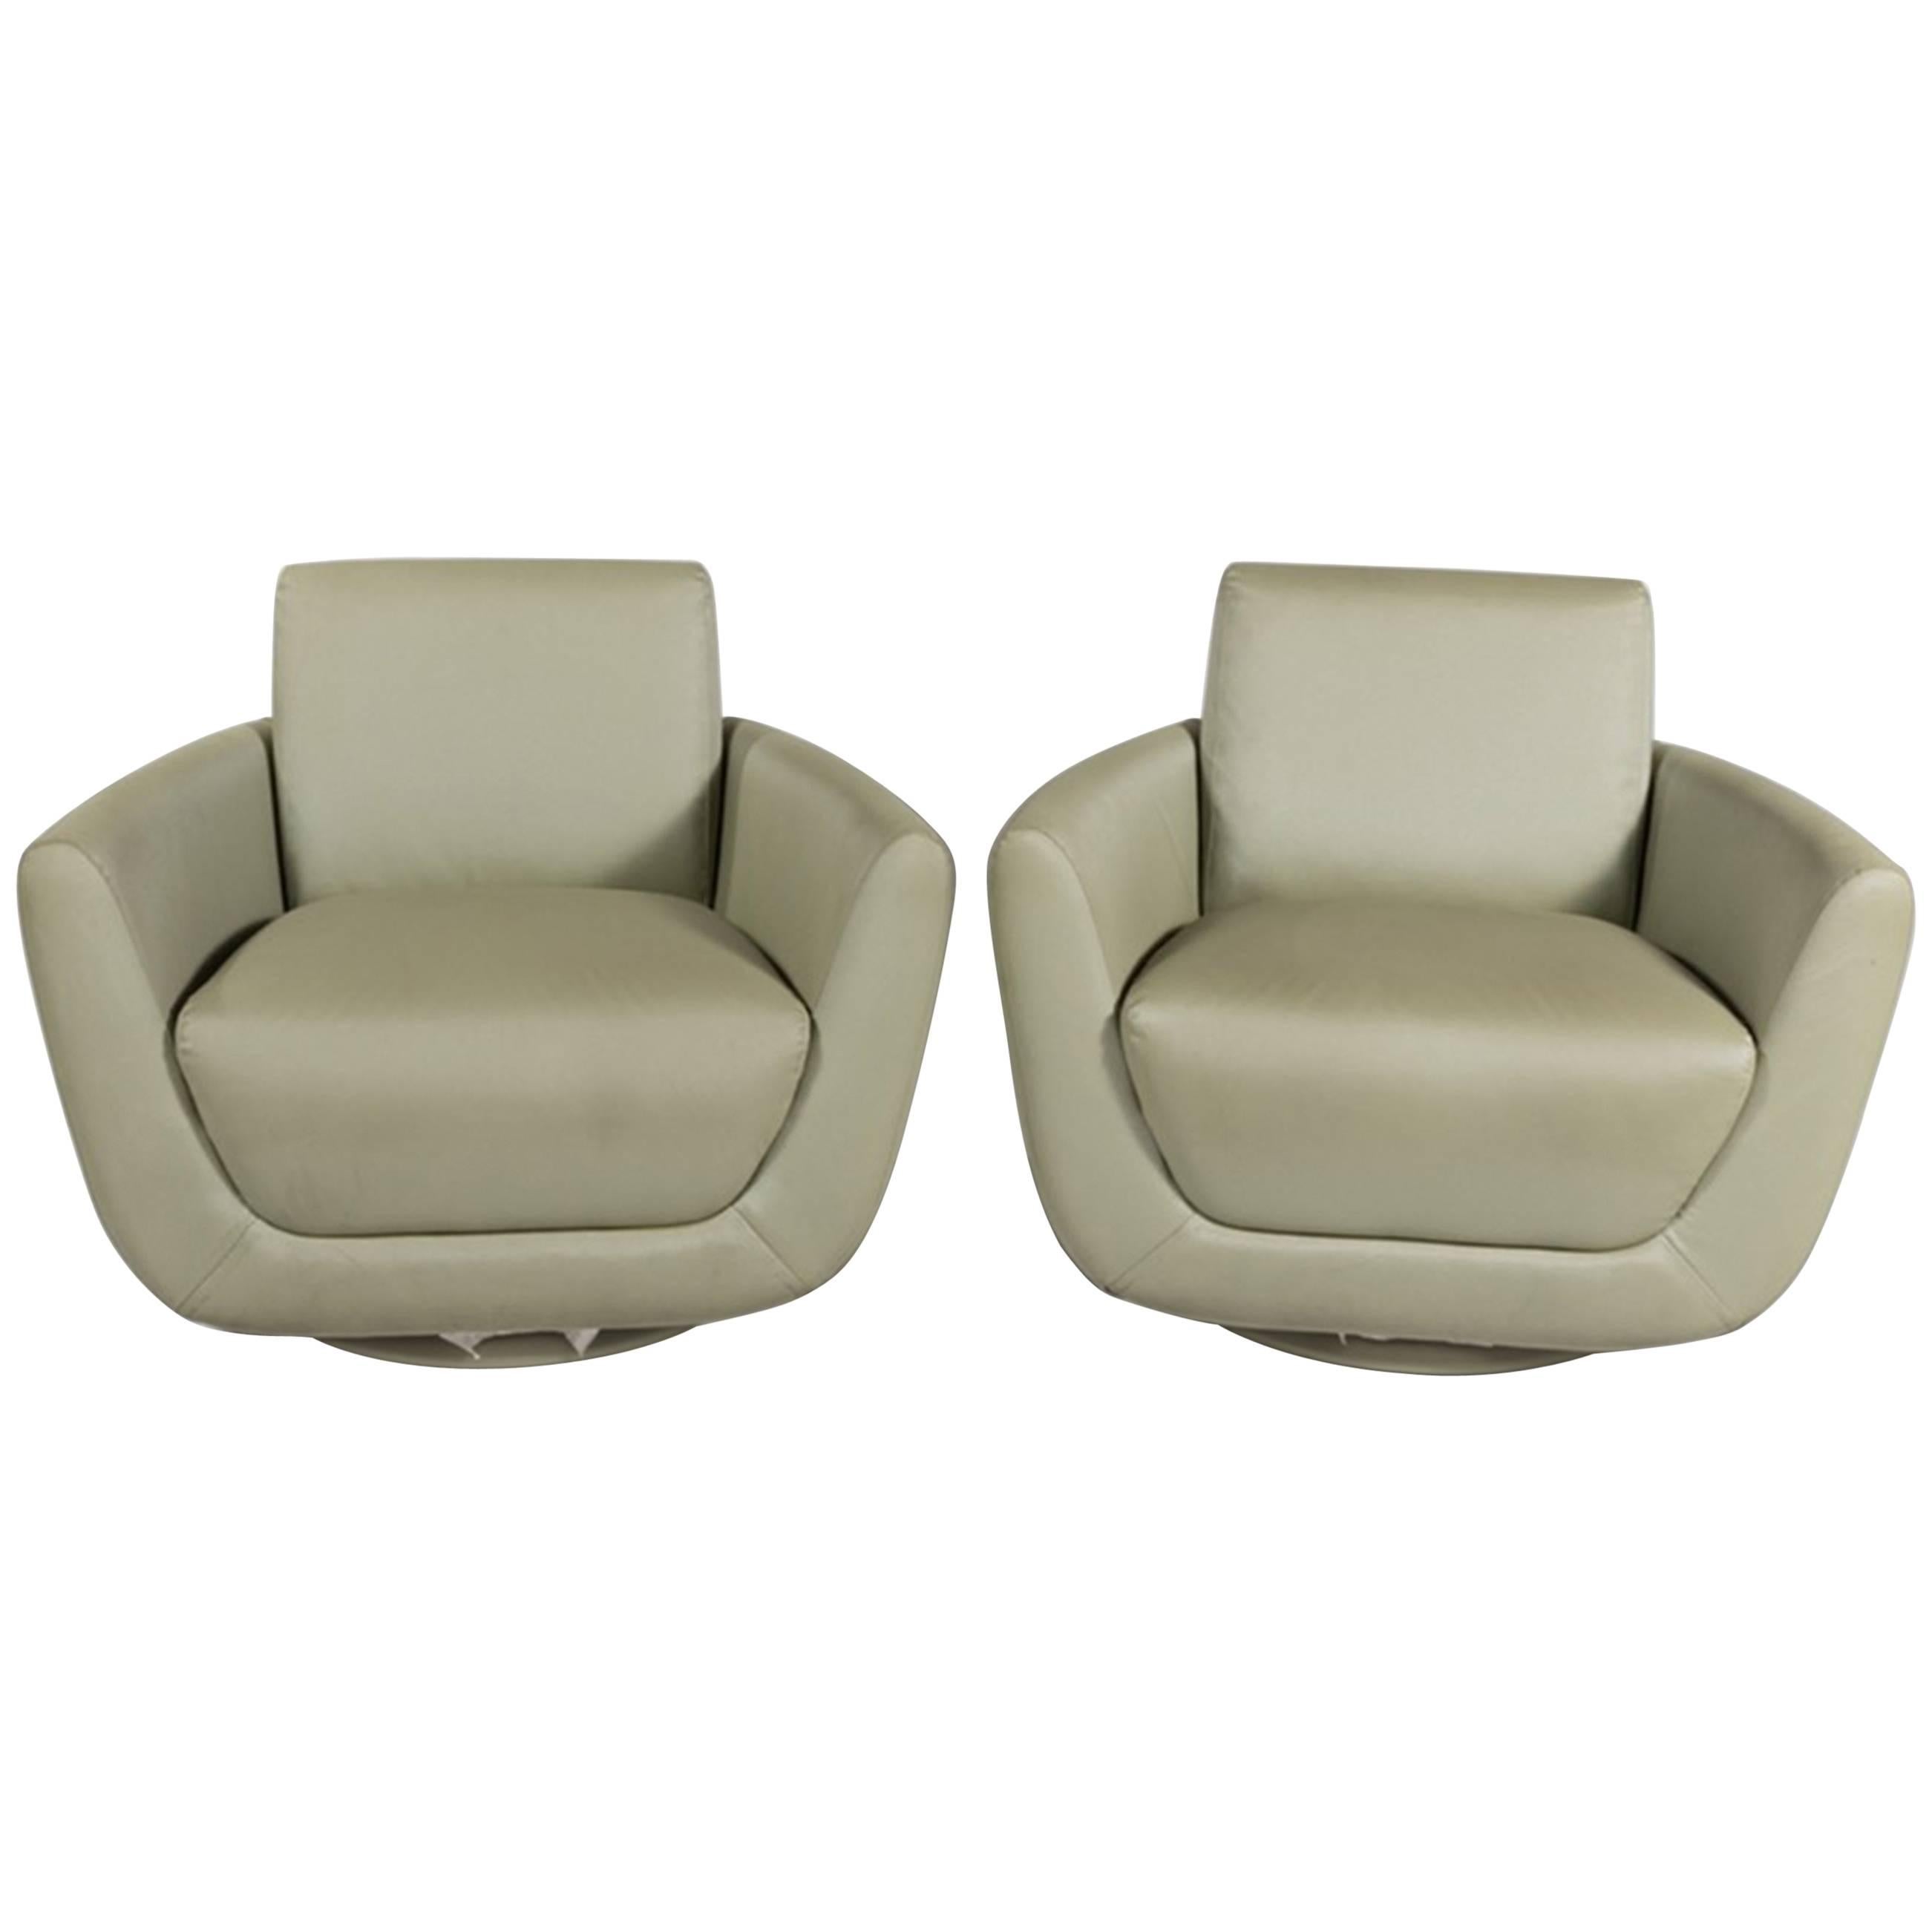 Chic Pair of Mid-Century Celery Green Swivel Chairs